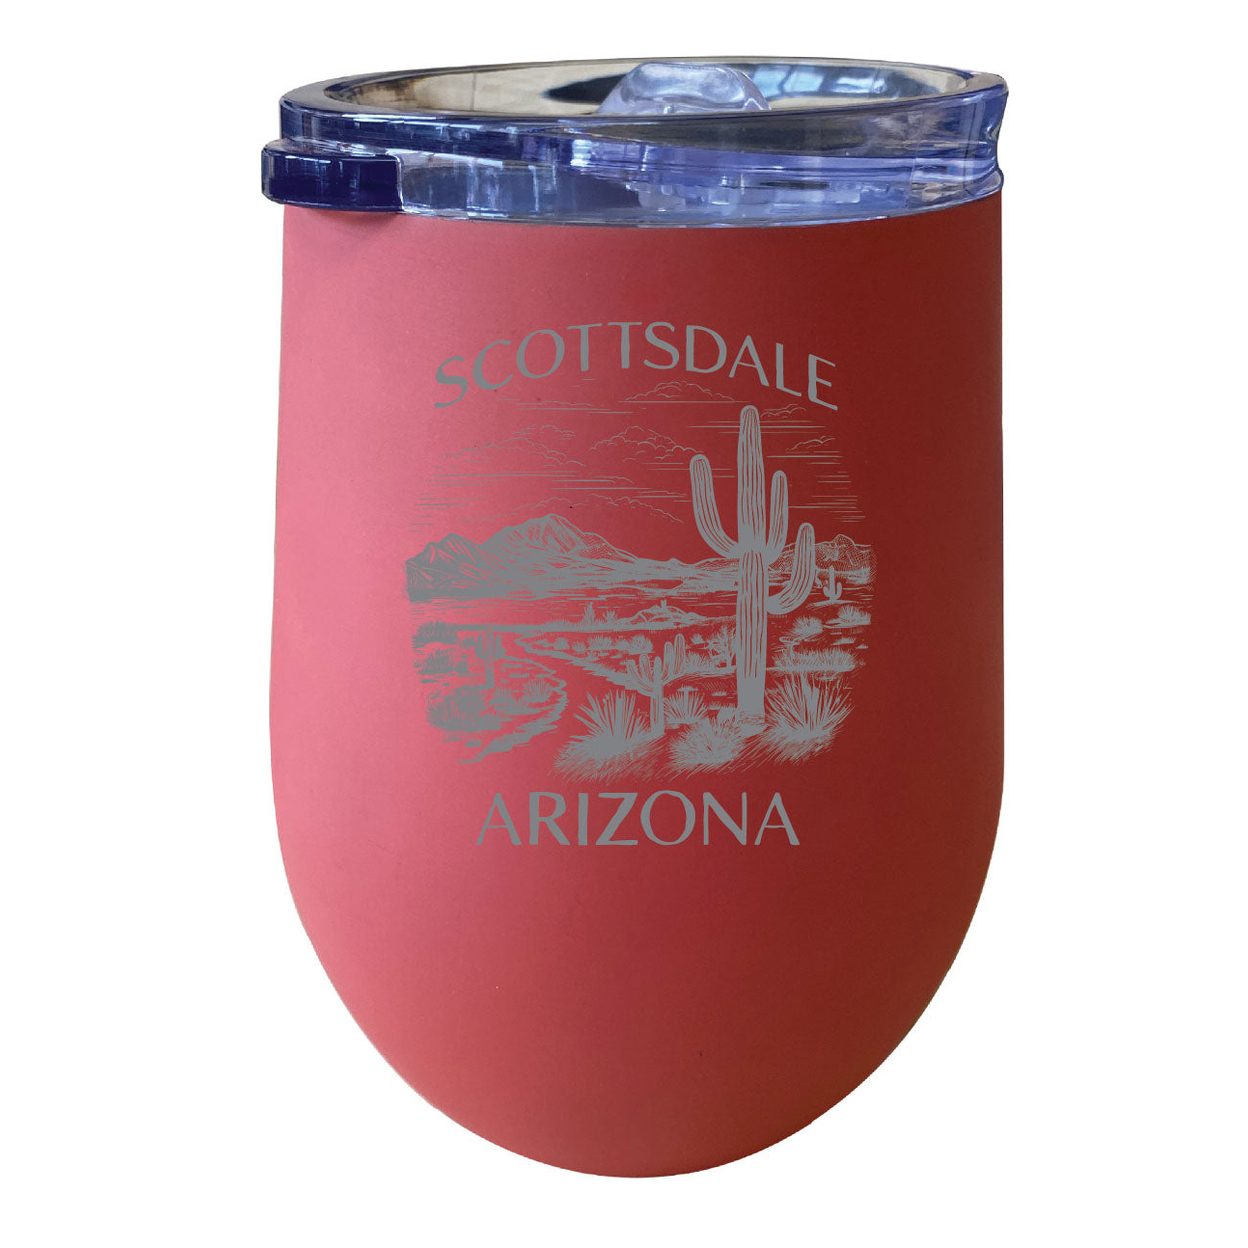 Scottsdale Arizona Souvenir 12 Oz Engraved Insulated Wine Stainless Steel Tumbler - Coral,,2-Pack